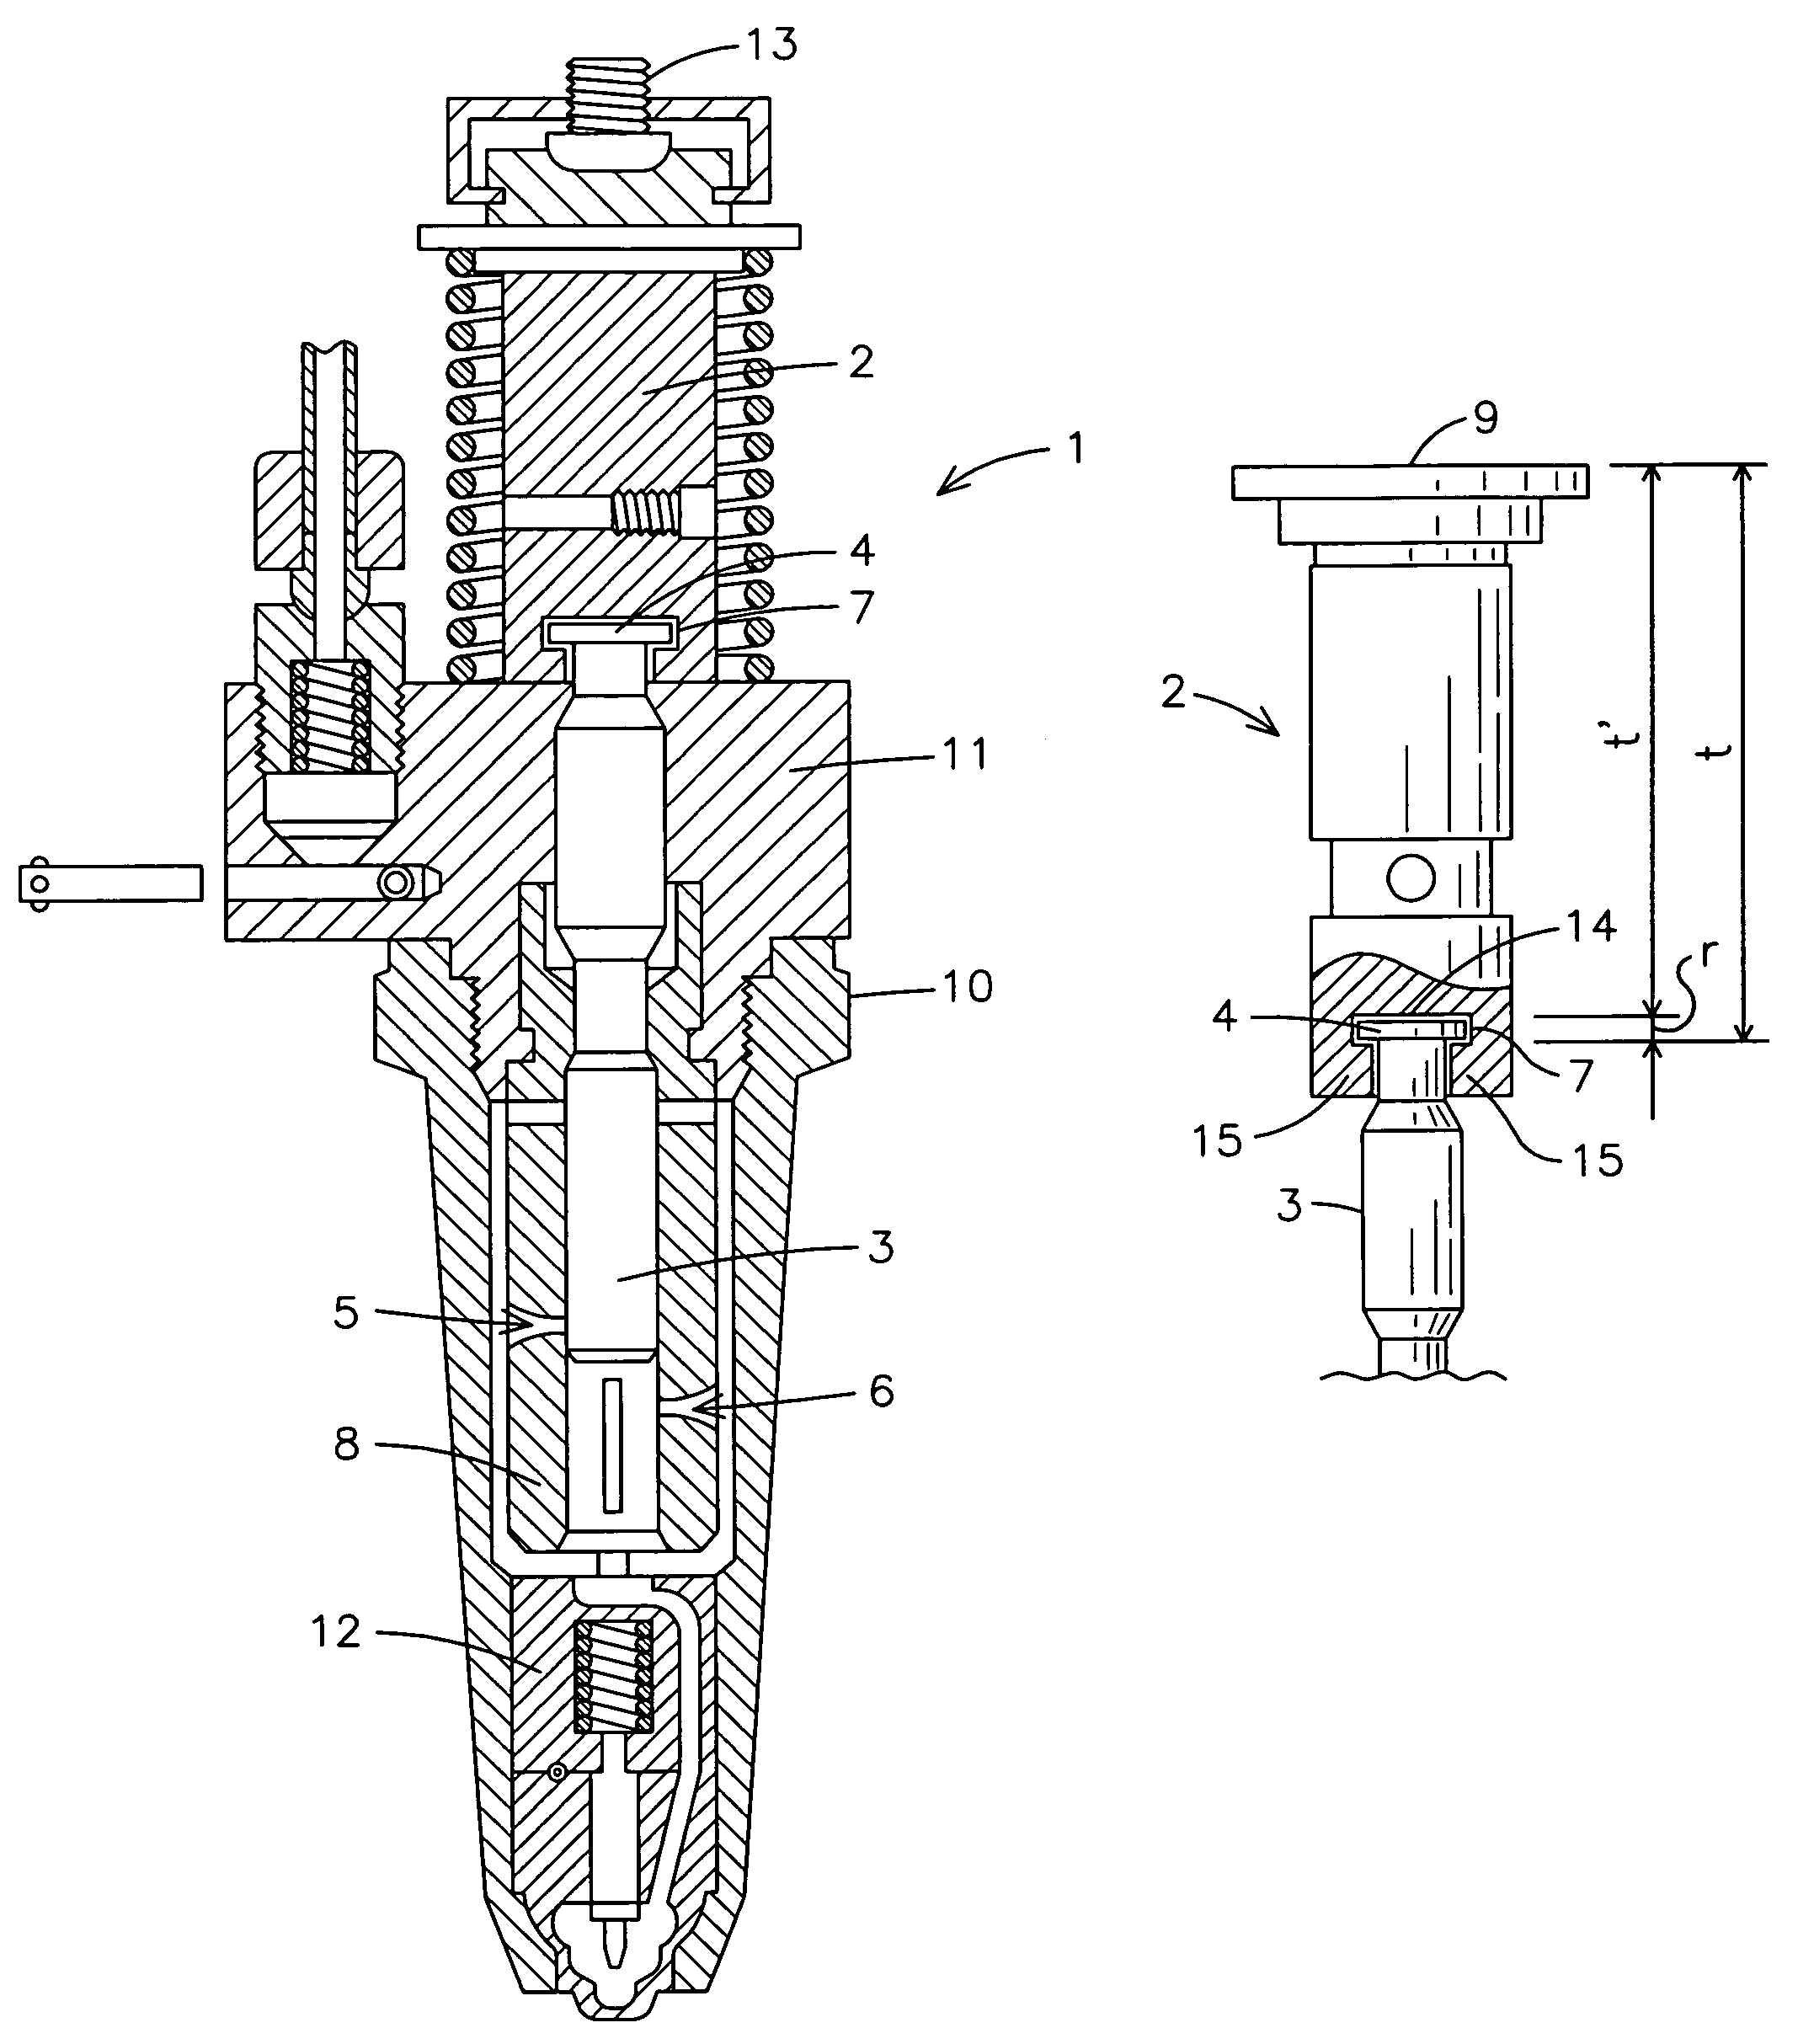 Methods of retarding injection timing of mechanical unit injectors using a modified pump follower